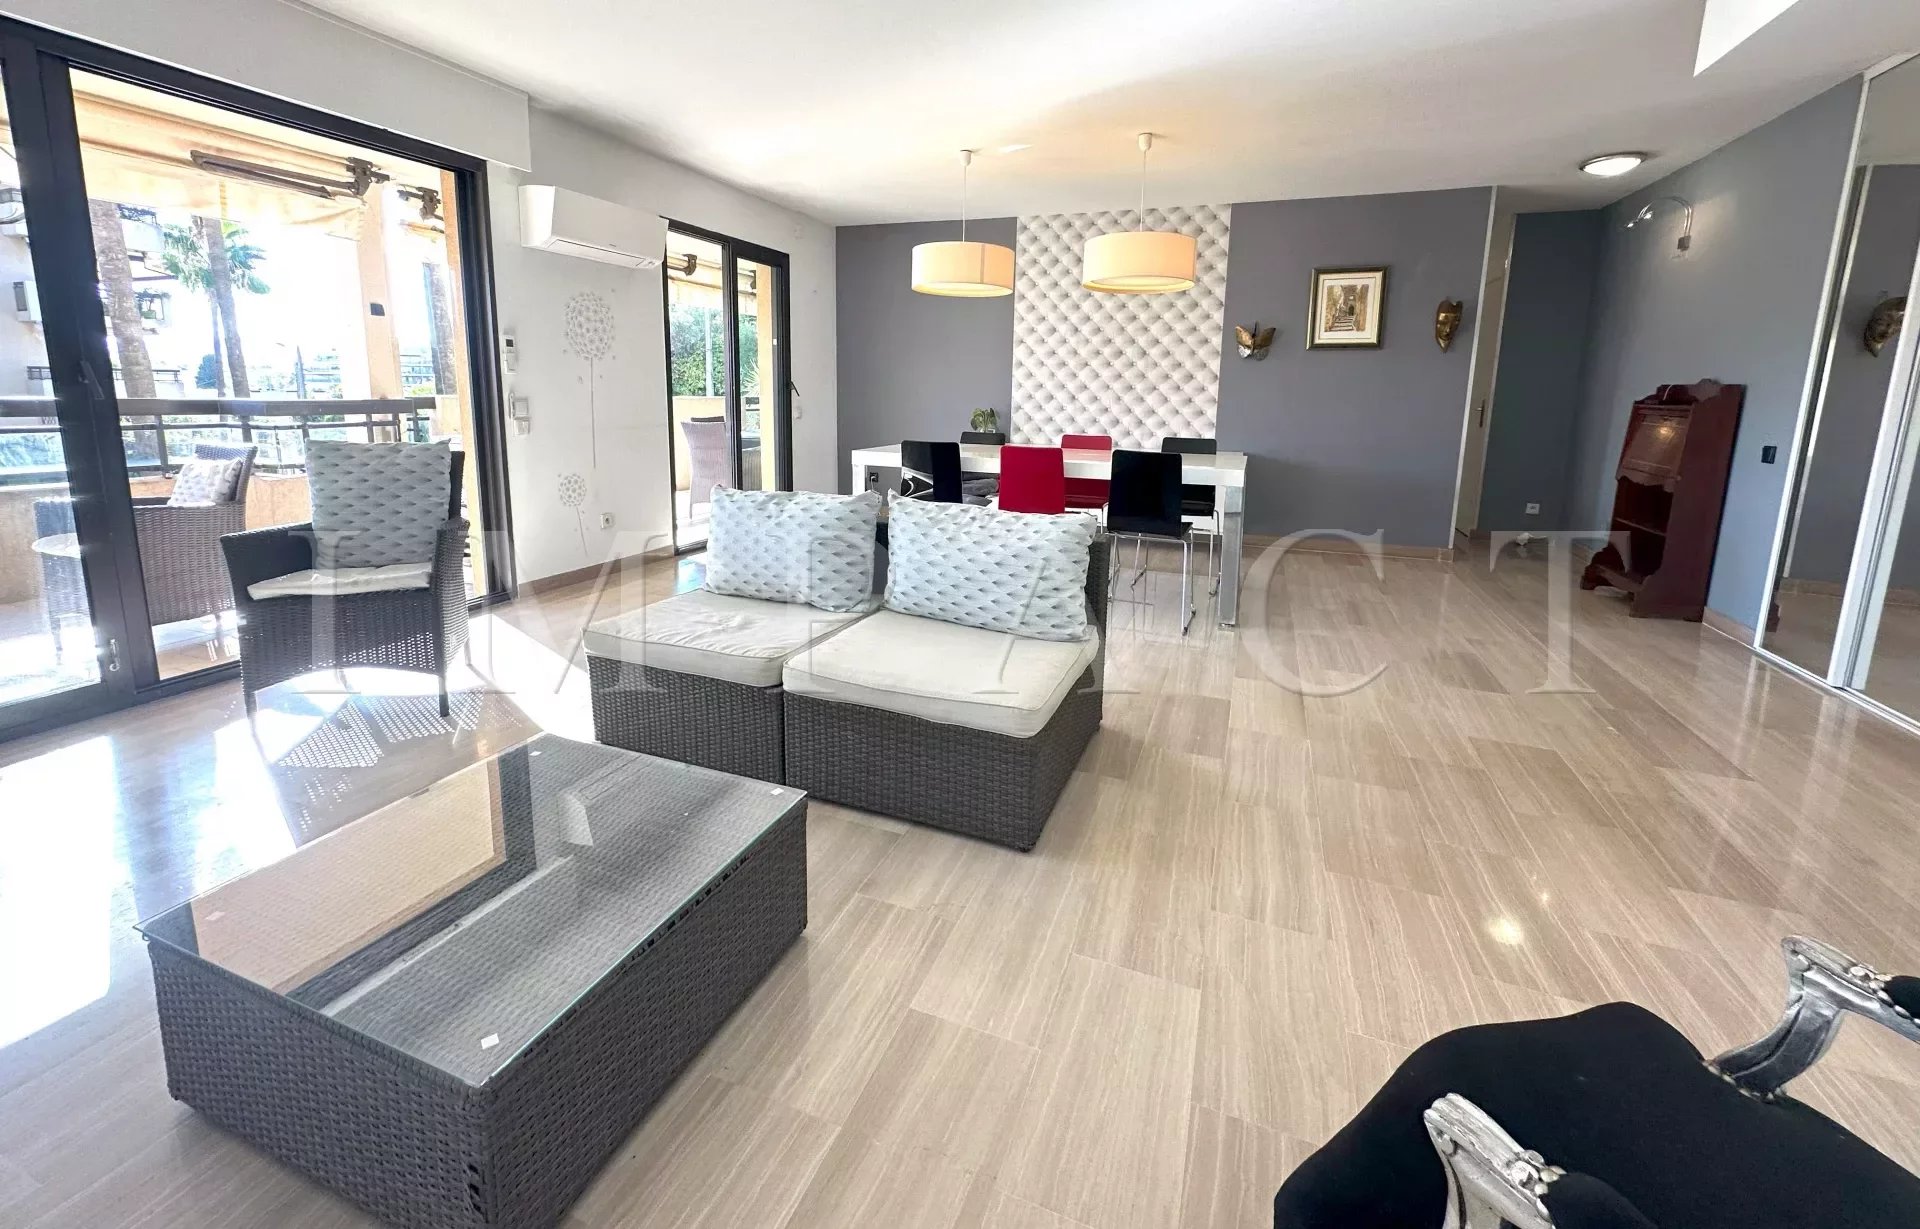 APARTMENT CANNES CITY 3 Bedrooms